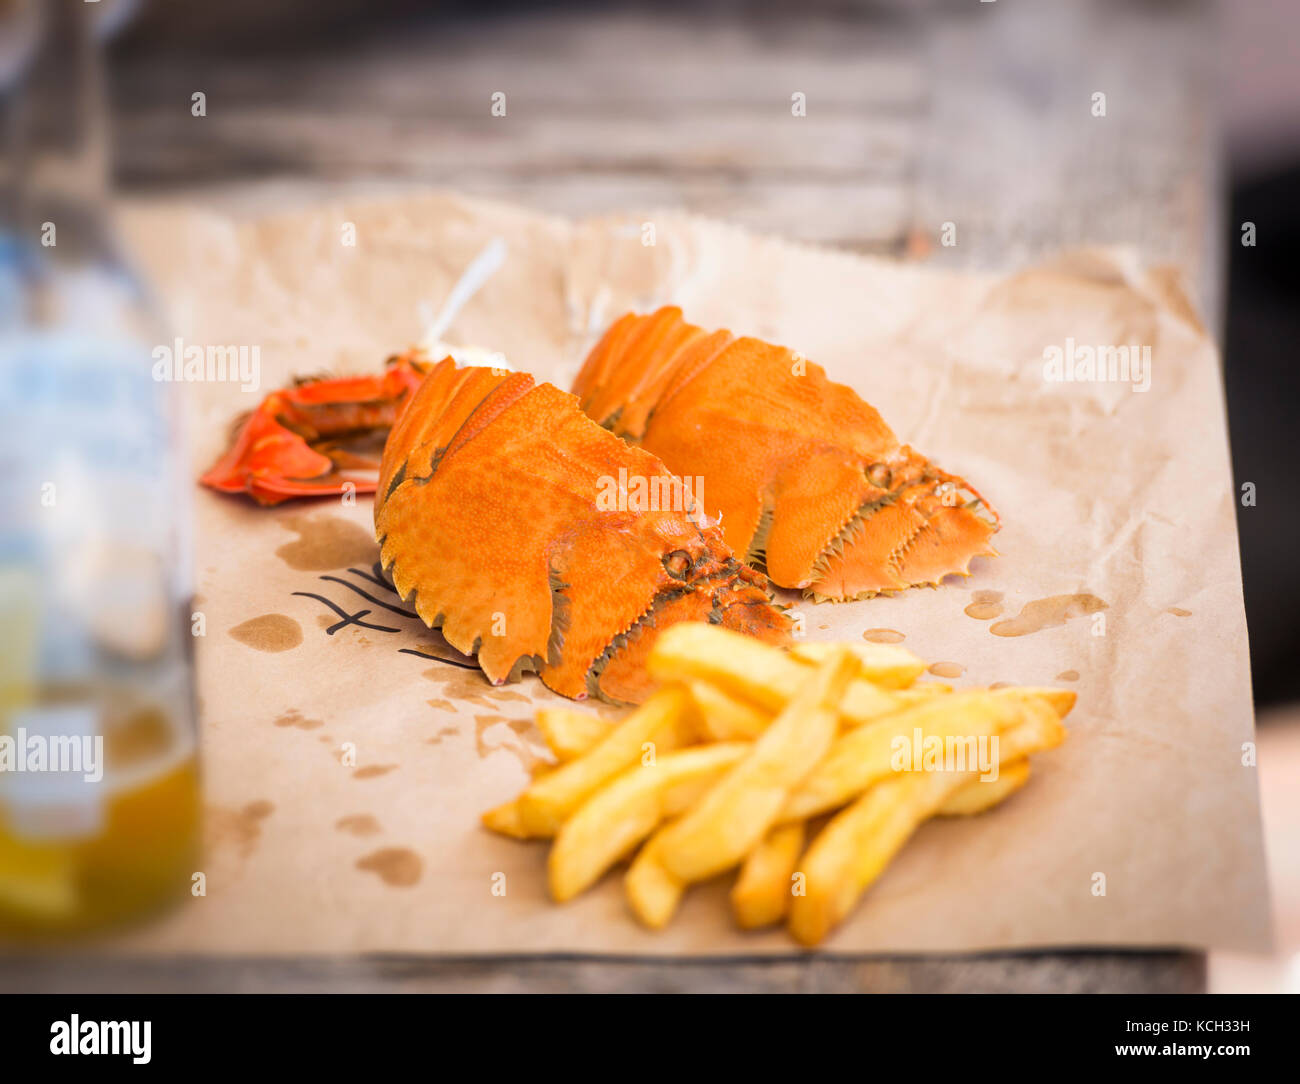 Modern take on fish and chips in Australia with Moreton Bay Bugs and hot chips Stock Photo